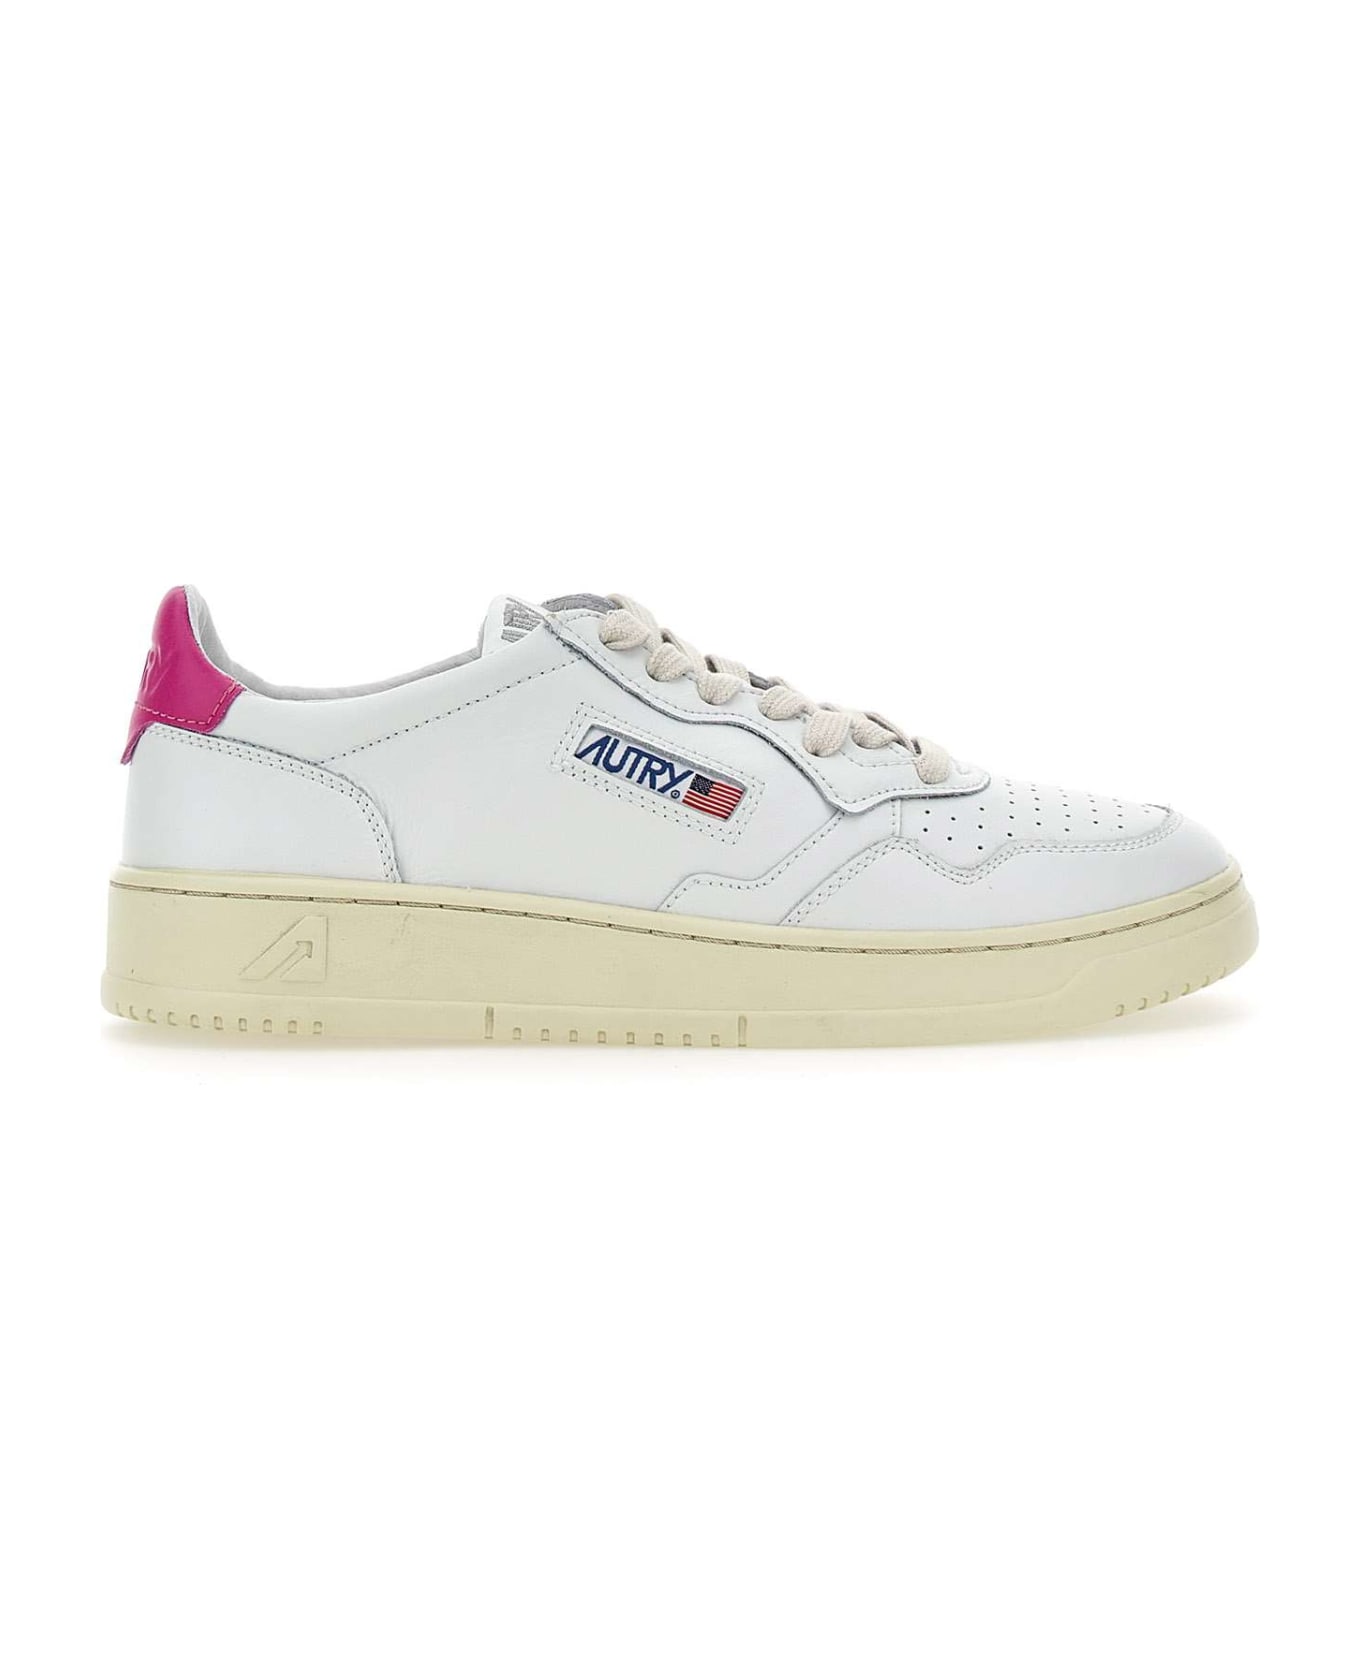 Autry 'll42' Leather Sneakers - WHITE/FUCHSIA